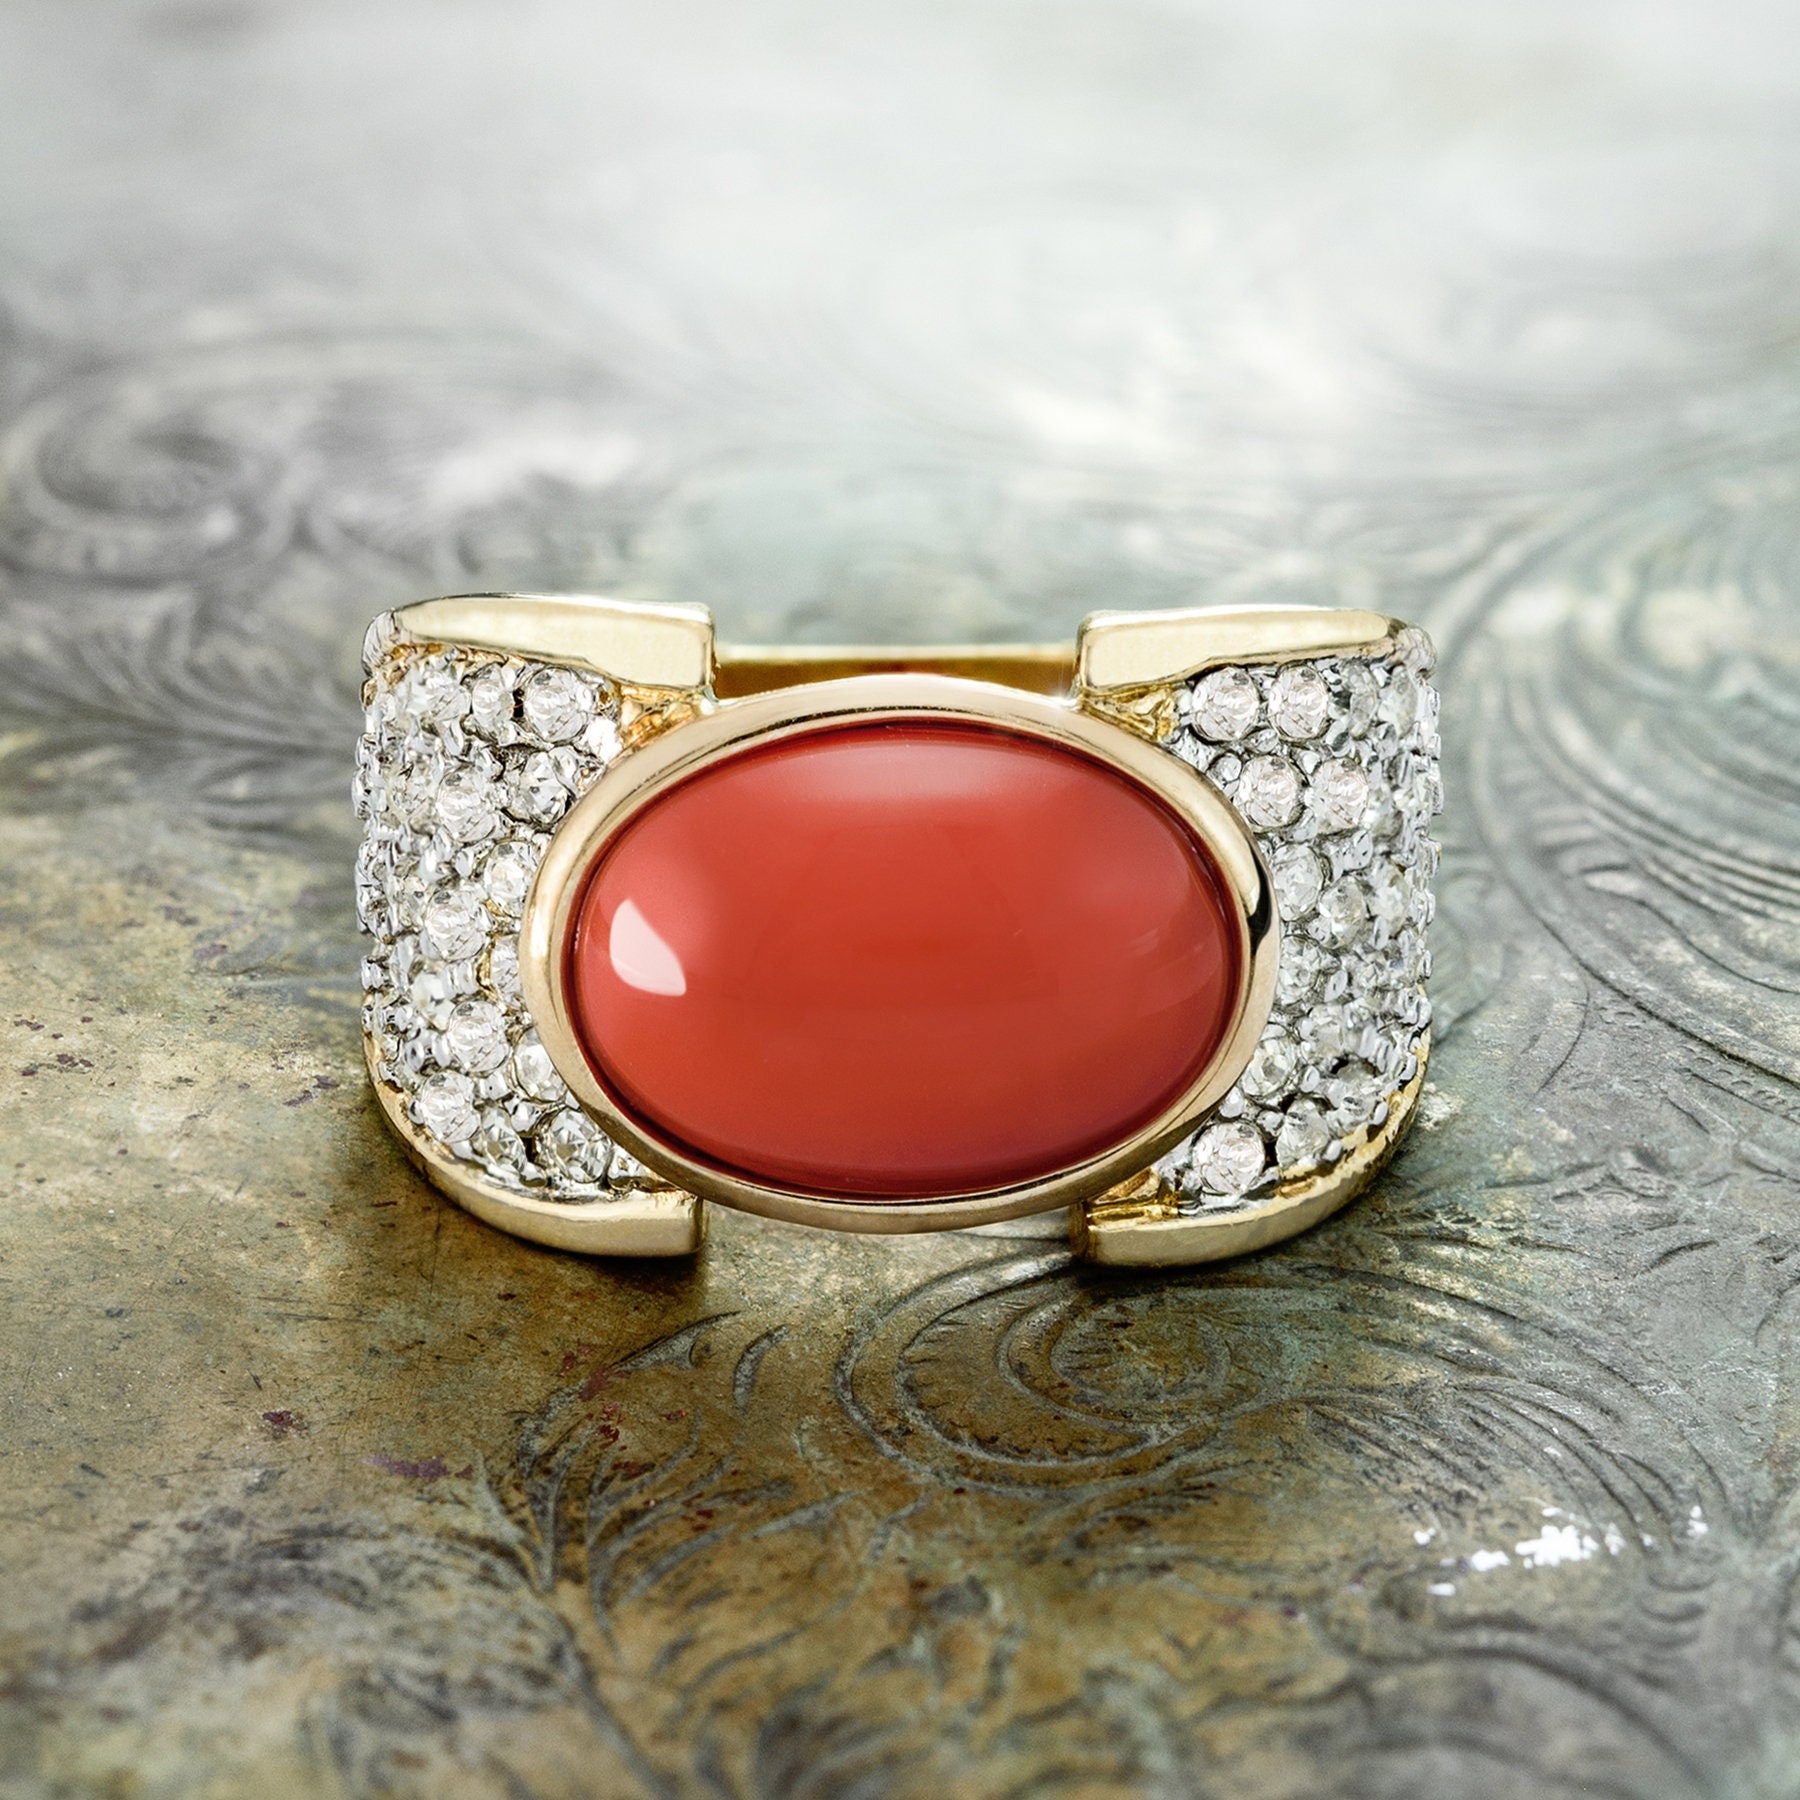 Vintage Ring Genuine Coral and Clear Swarovski Crystal Cocktail Ring 18k Gold Antique Womans Jewelry R1934 - Limited Stock - Never Worn